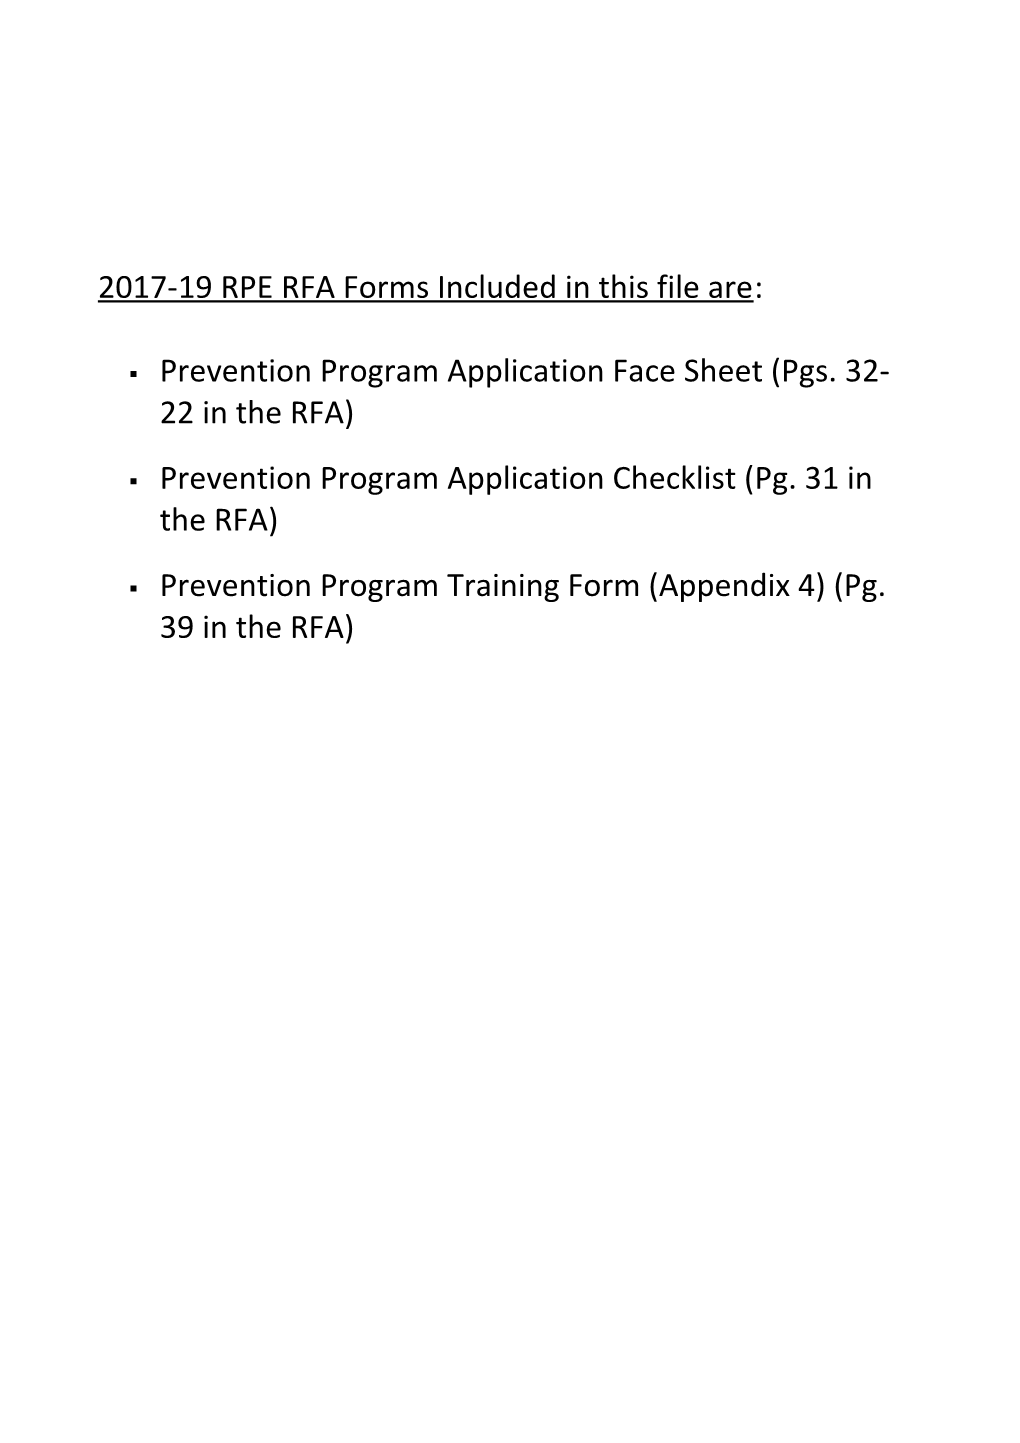 2017-19 RPE RFA Forms Included in This File Are